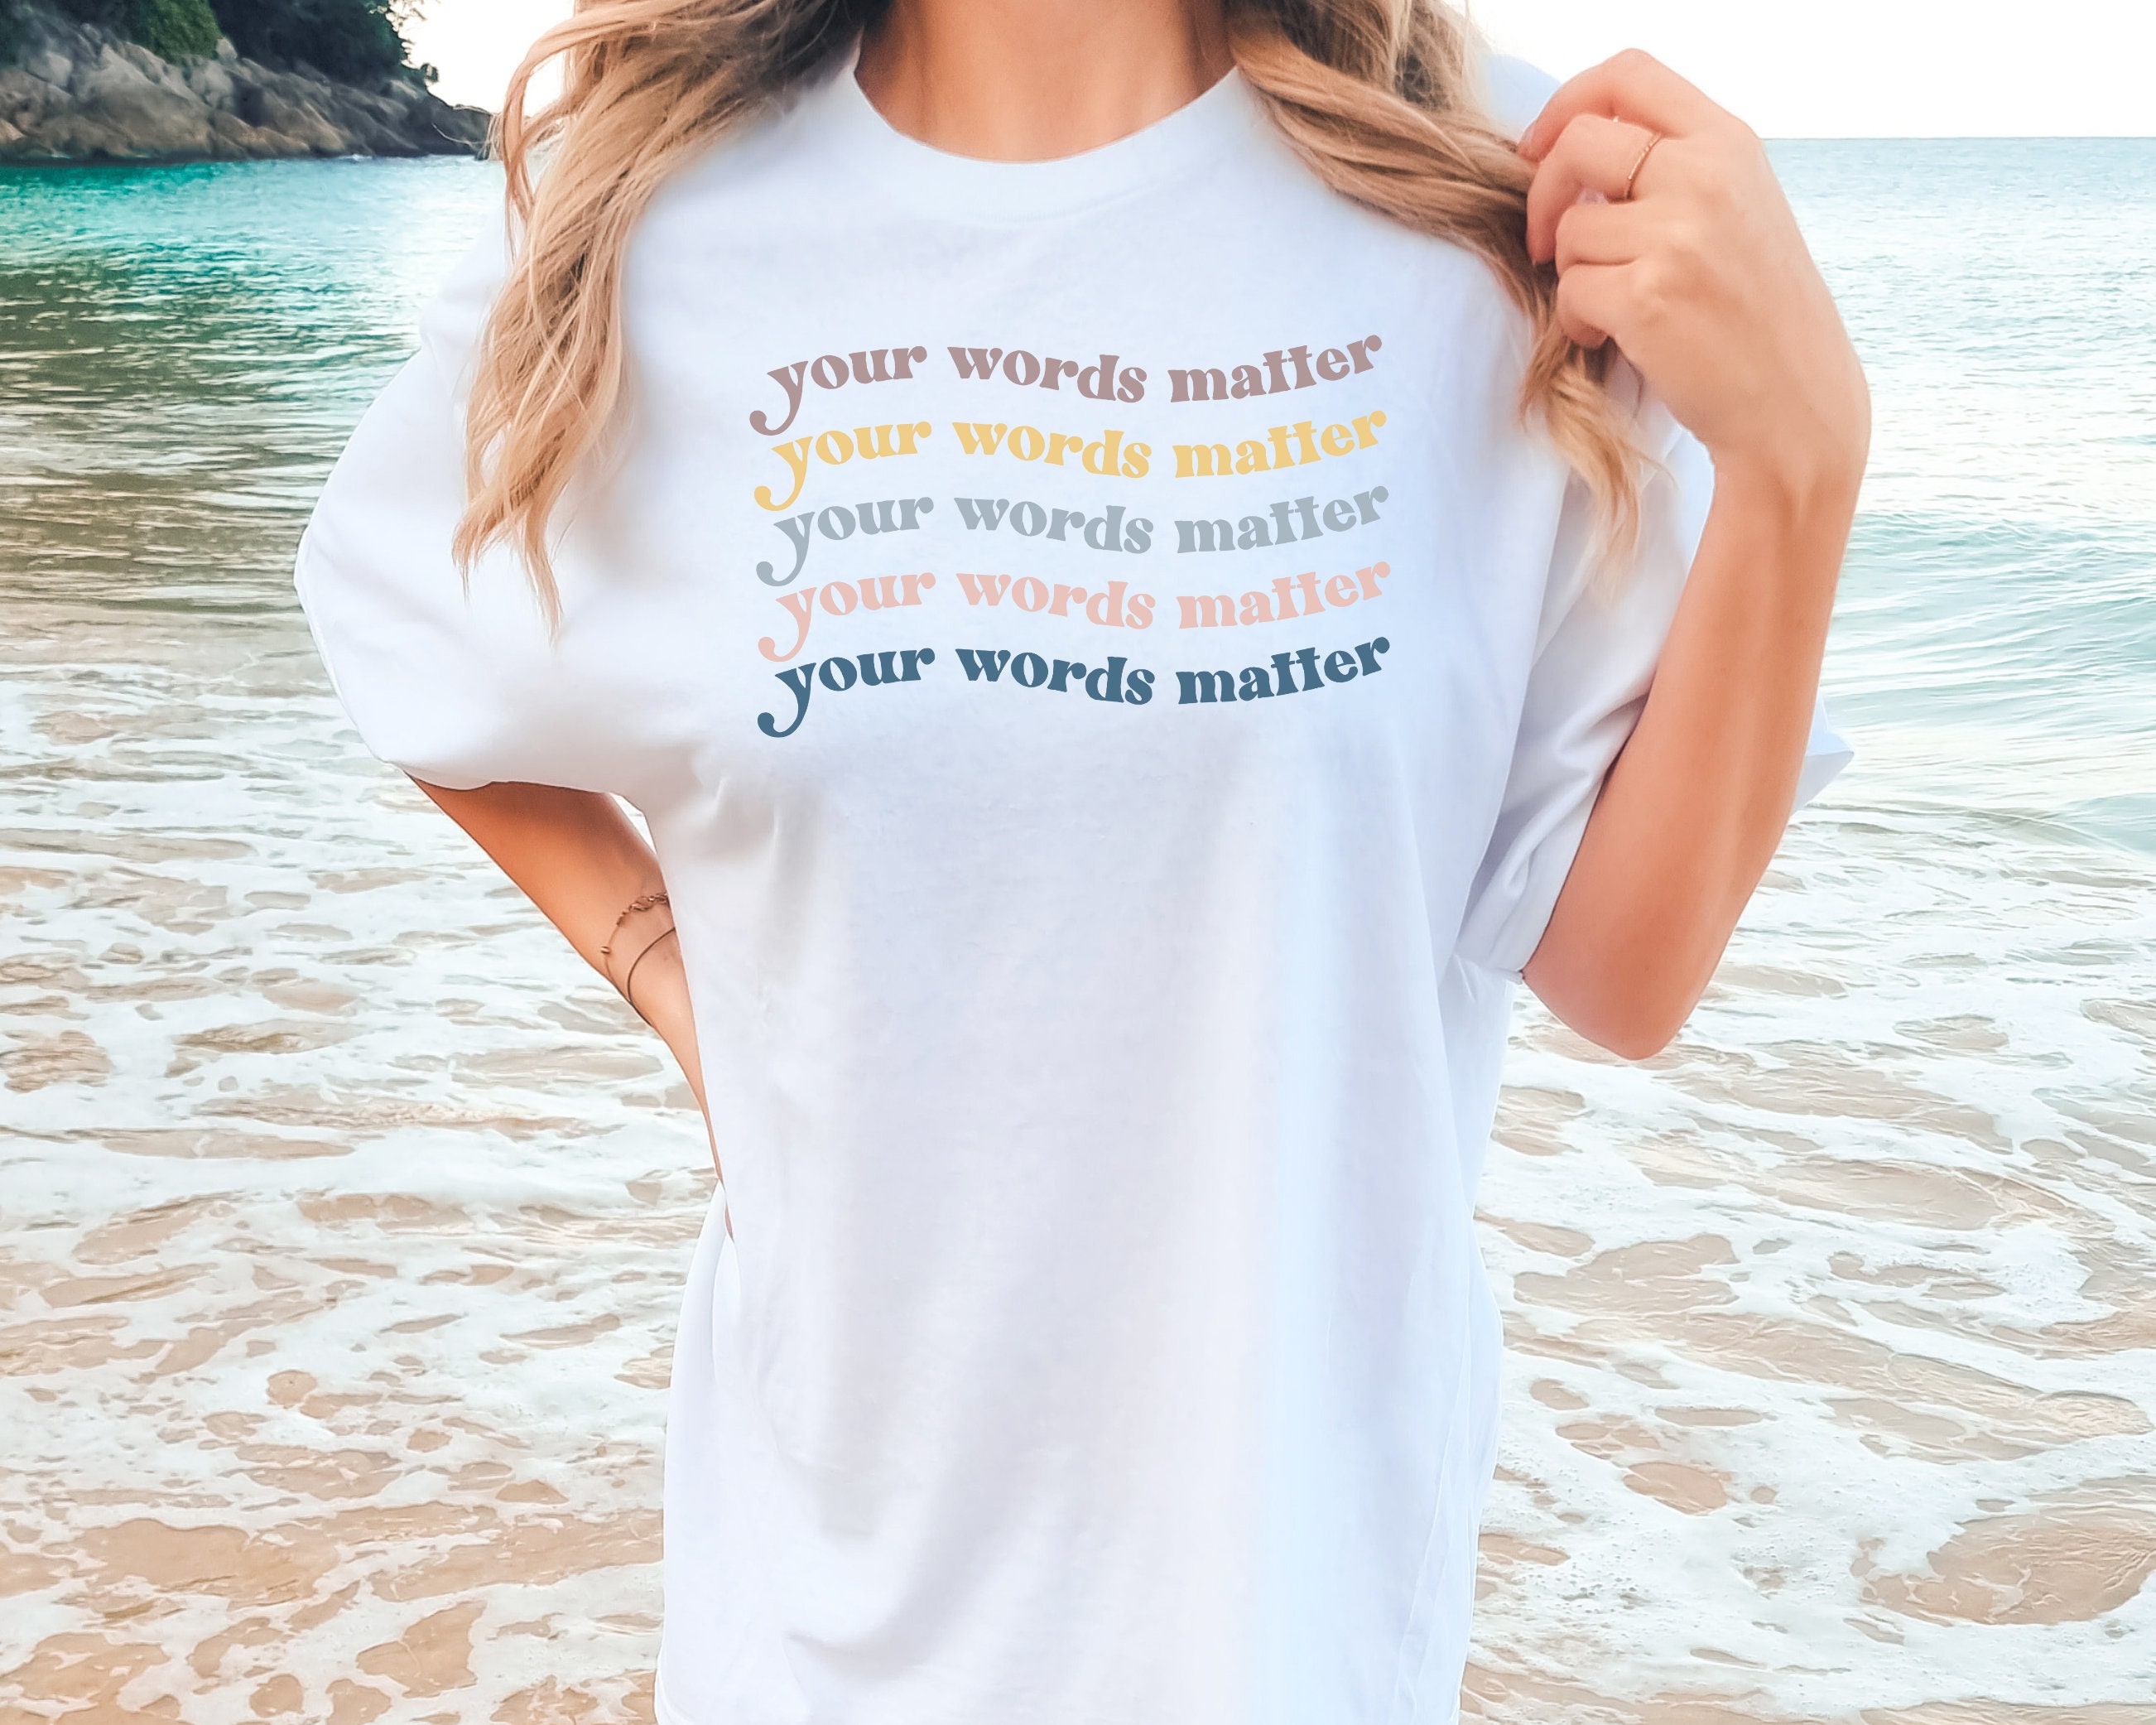 Discover  Speech Therapy Shirt, Your Words Matter, Speech Therapy Apparel, Speech Pathologist Shirt, Therapy Shirt, Language Therapy